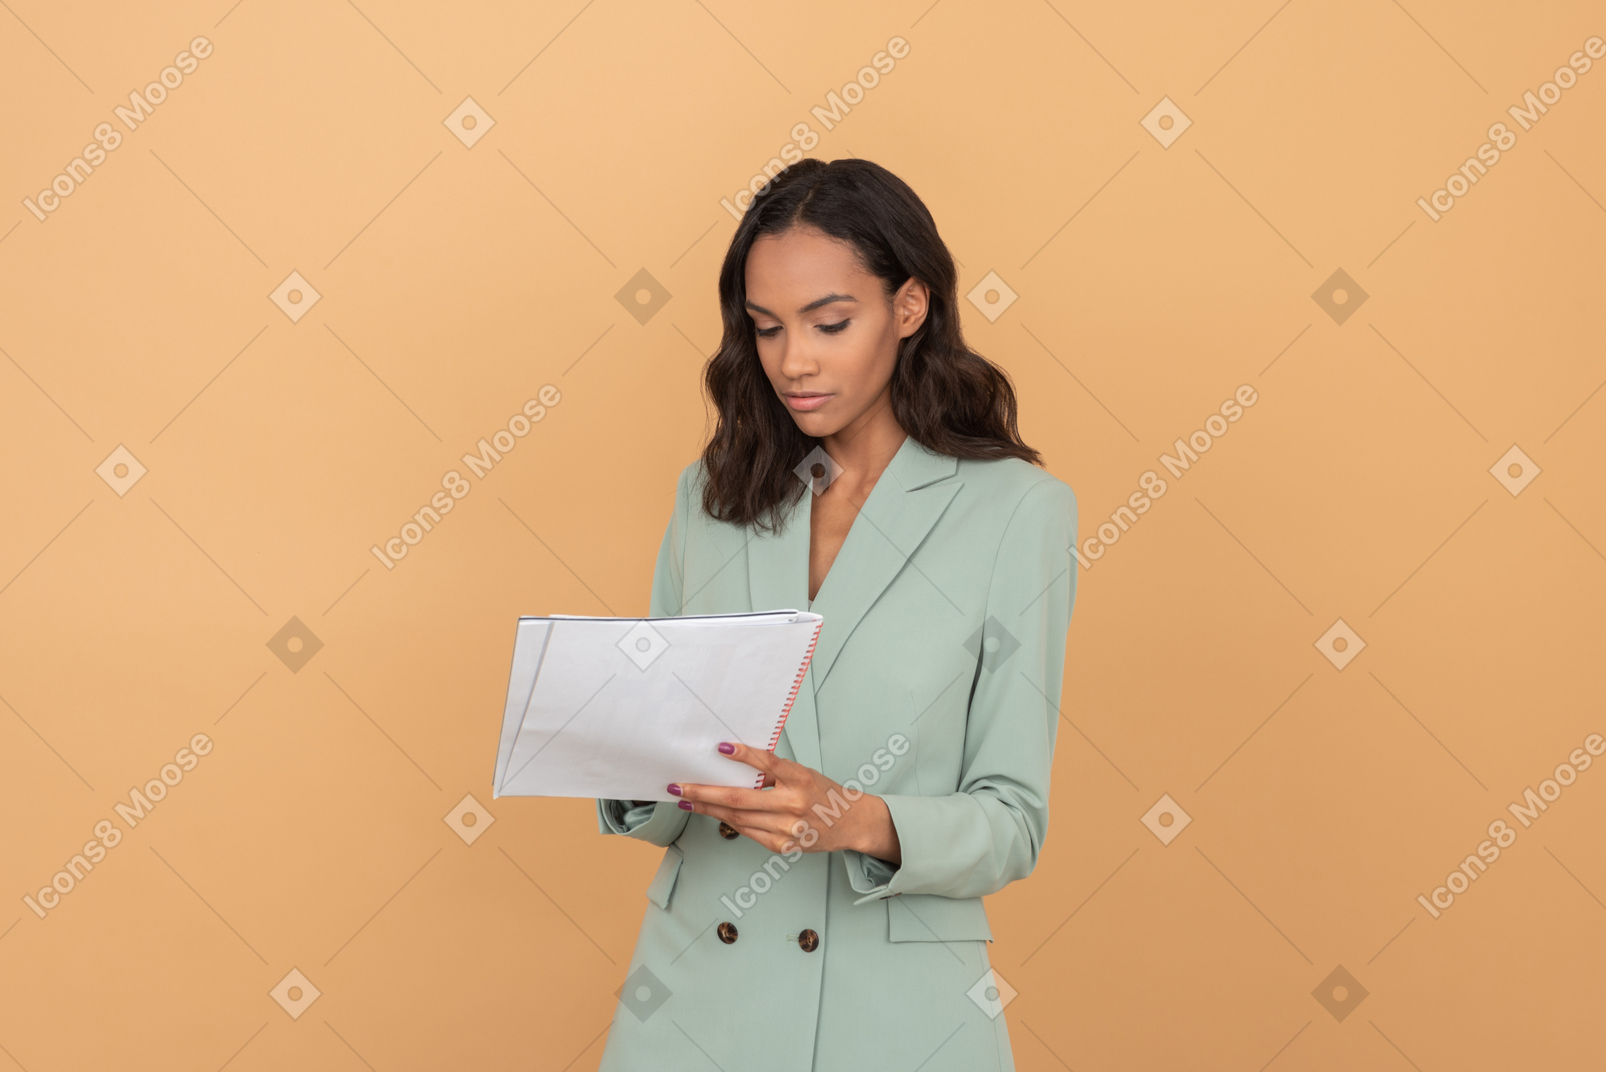 Attractive young office worker reading some papers